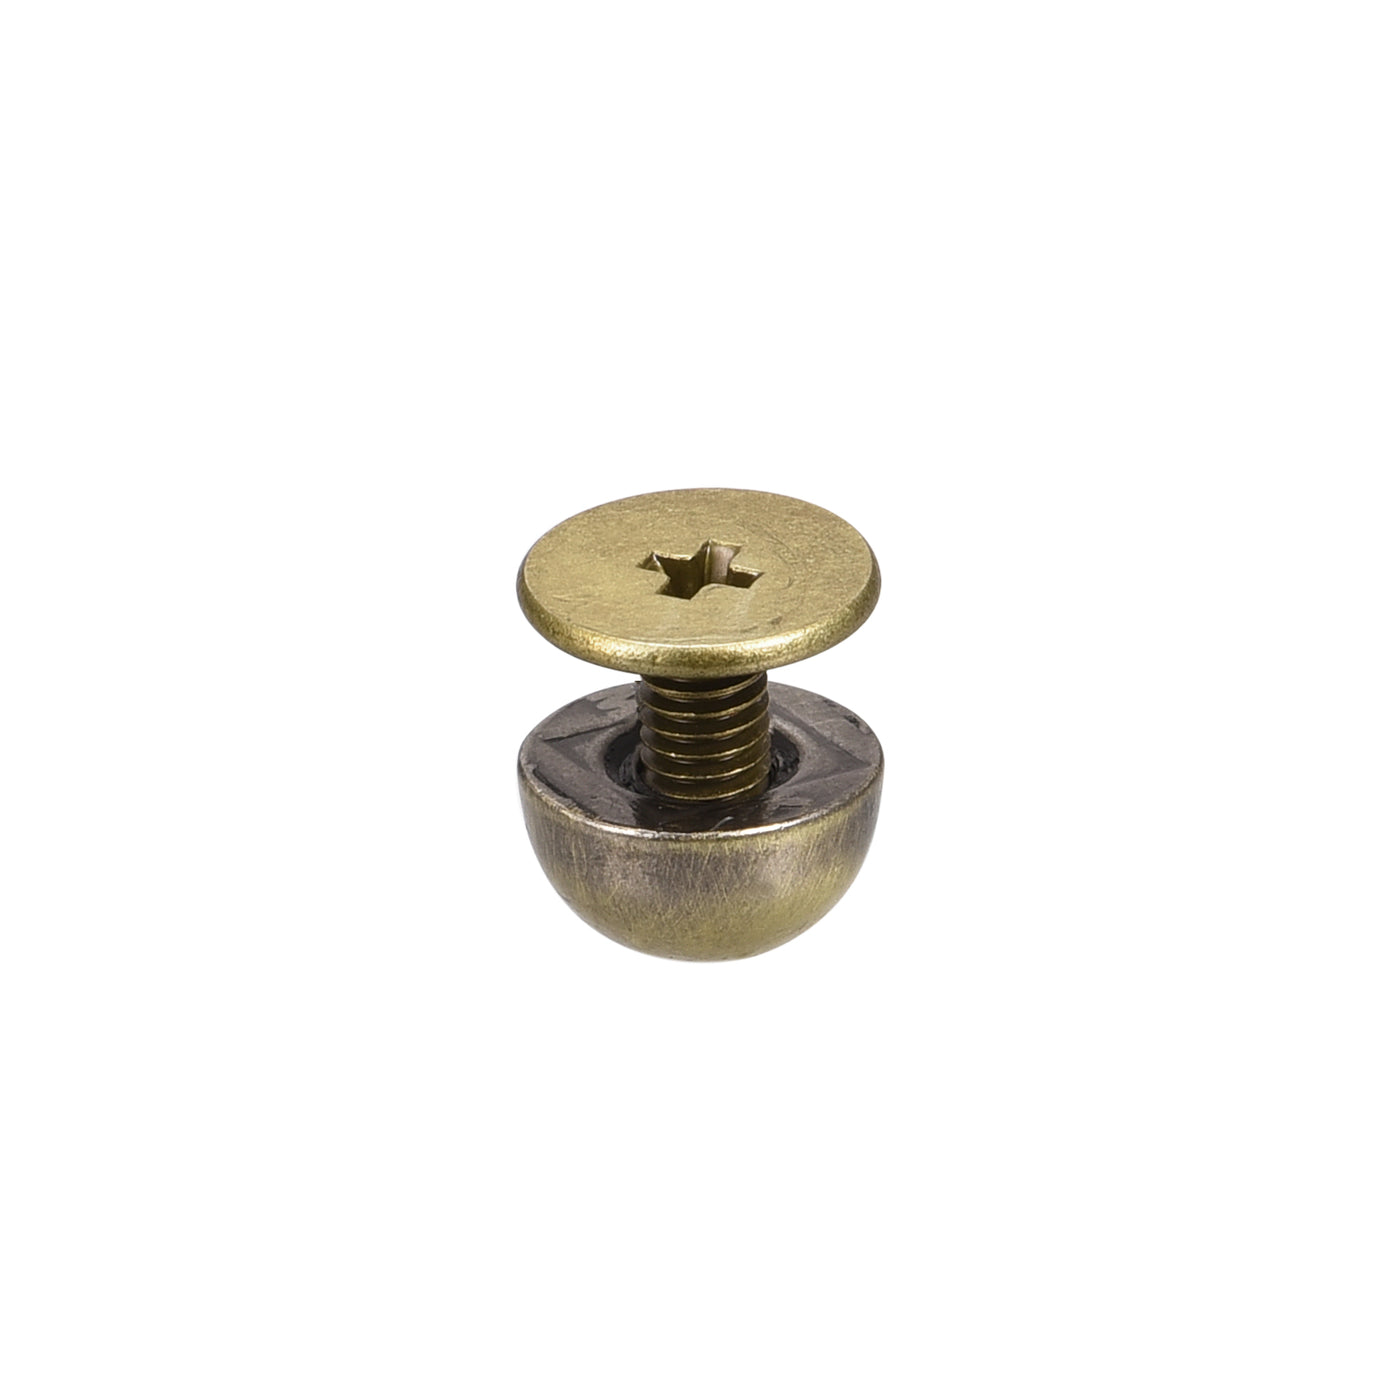 Uxcell Uxcell 10x6mm Screw Back Rivets Hollow Curved Head Leather Studs Bronze Tone 10 Sets